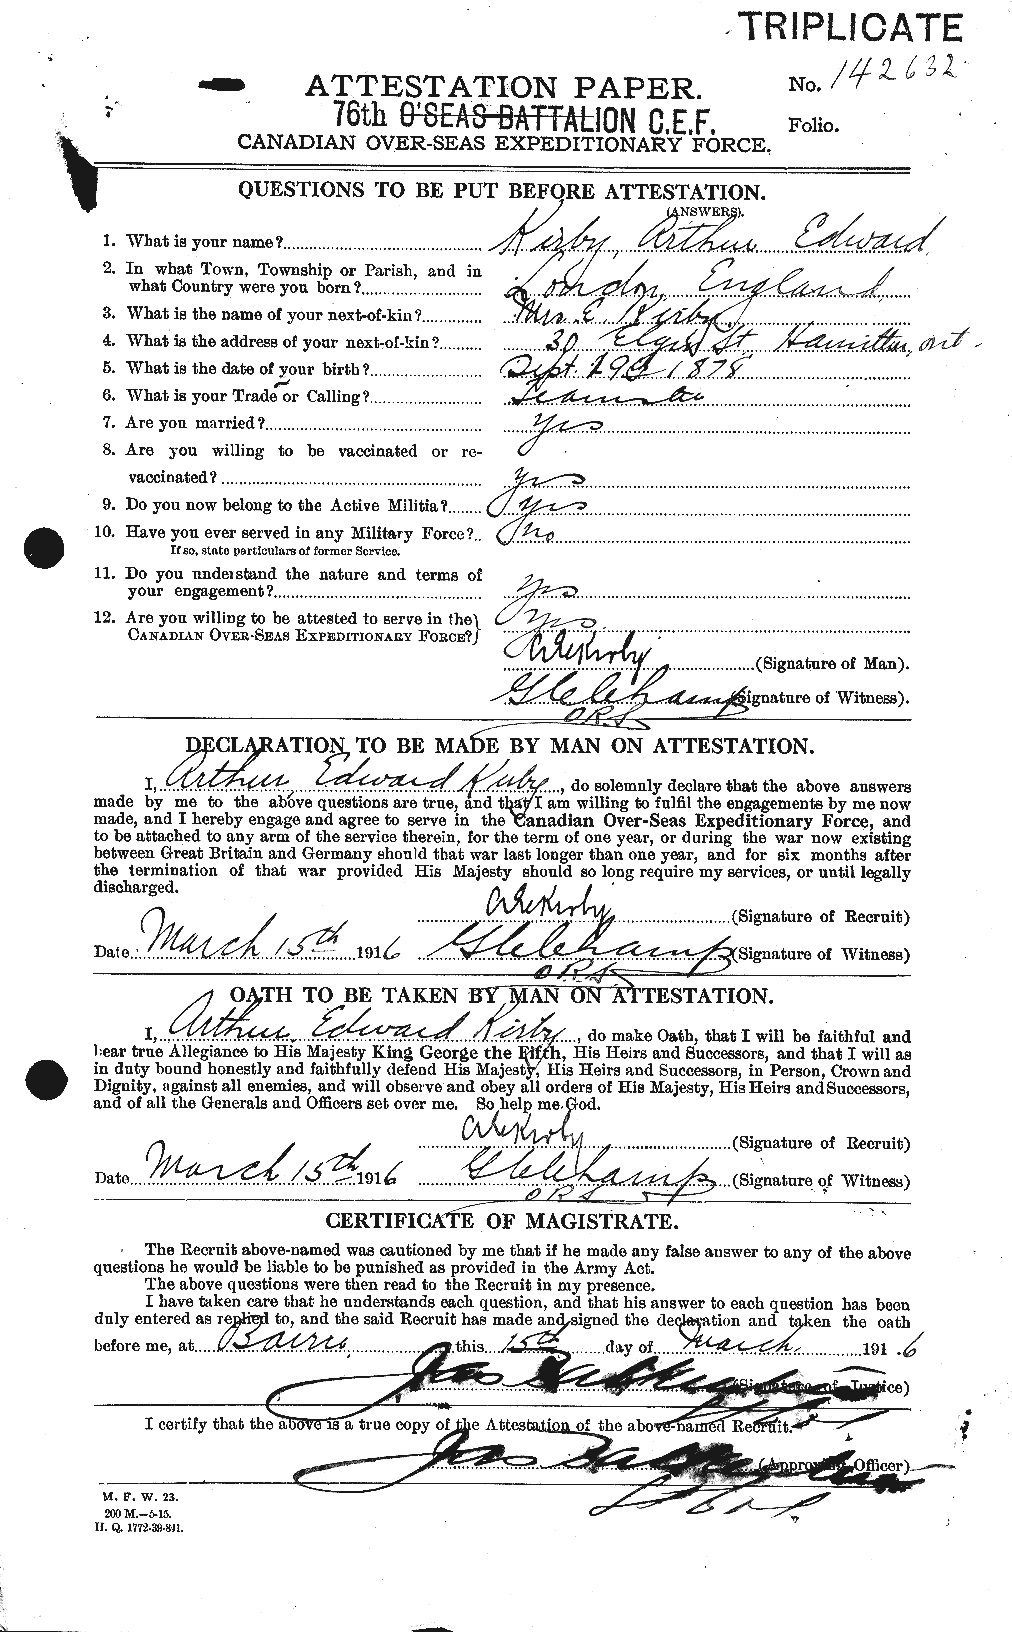 Personnel Records of the First World War - CEF 437154a